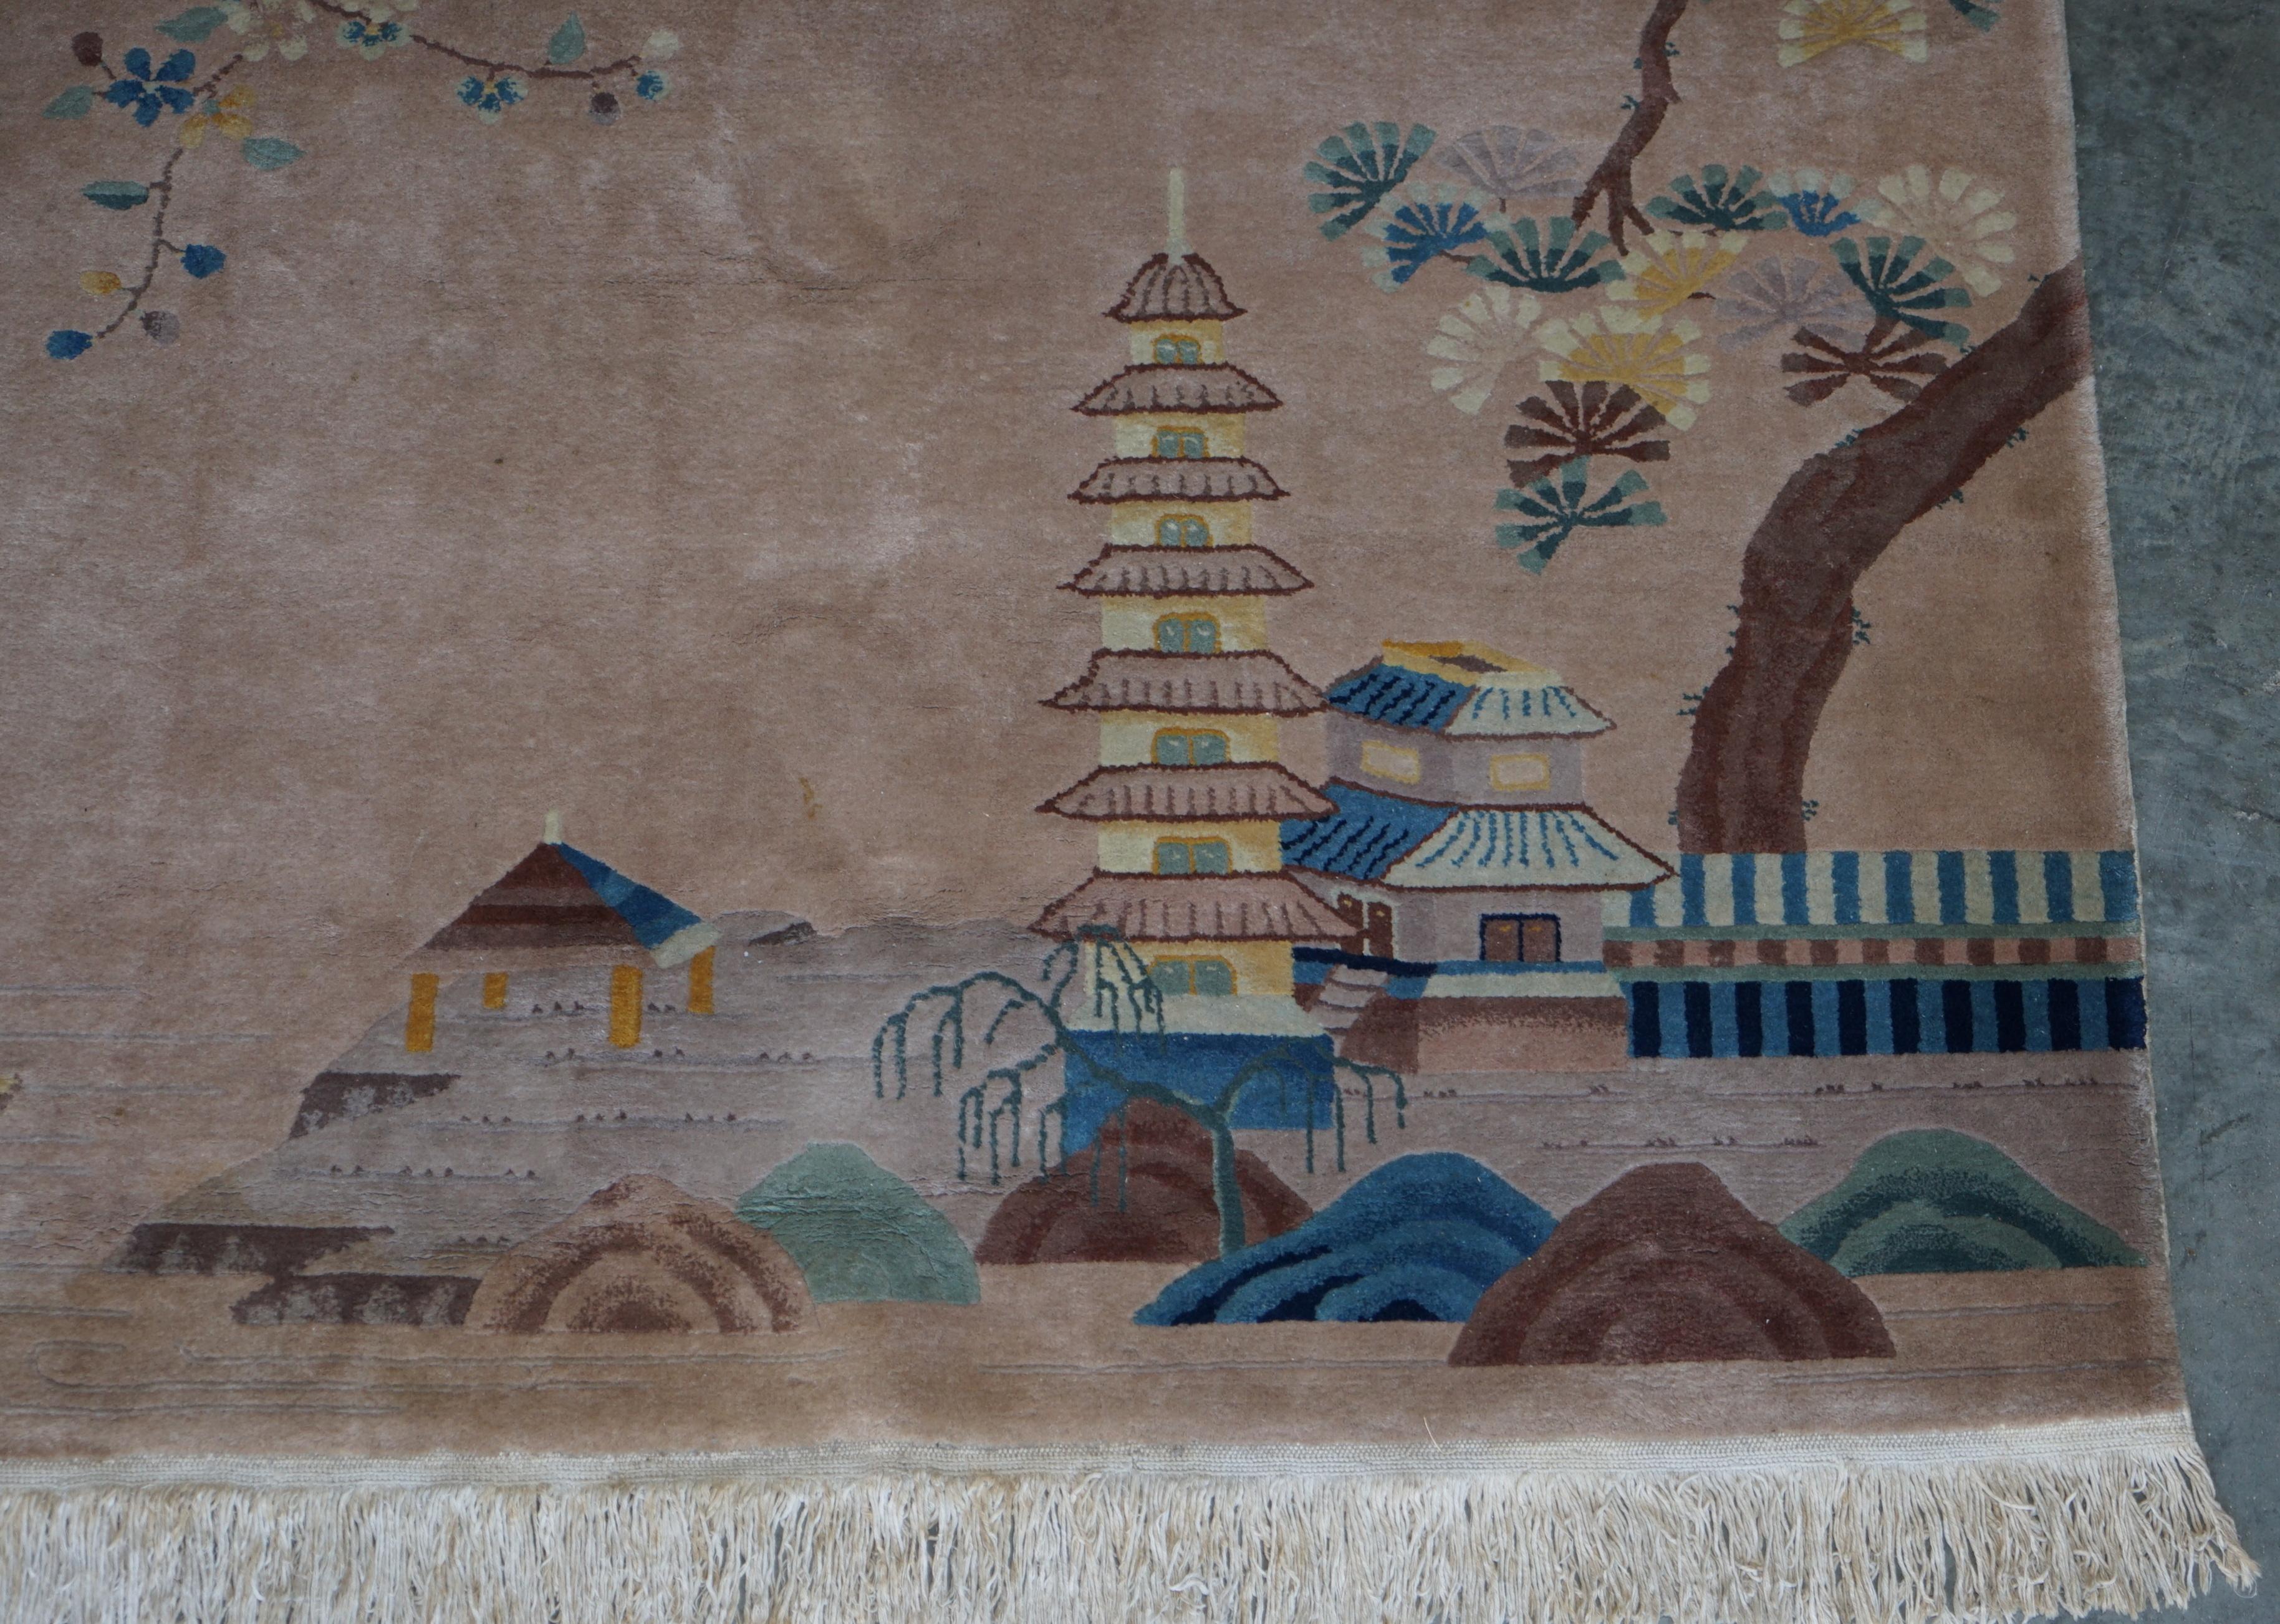 We are delighted to offer for sale this medium sized country house, vintage Chinese rug with lovely decoration of a Pagoda Temple and mystical tree

I have a collection of 12 rugs I’m now listing for sale of all kinds of ages, periods, and sizes,